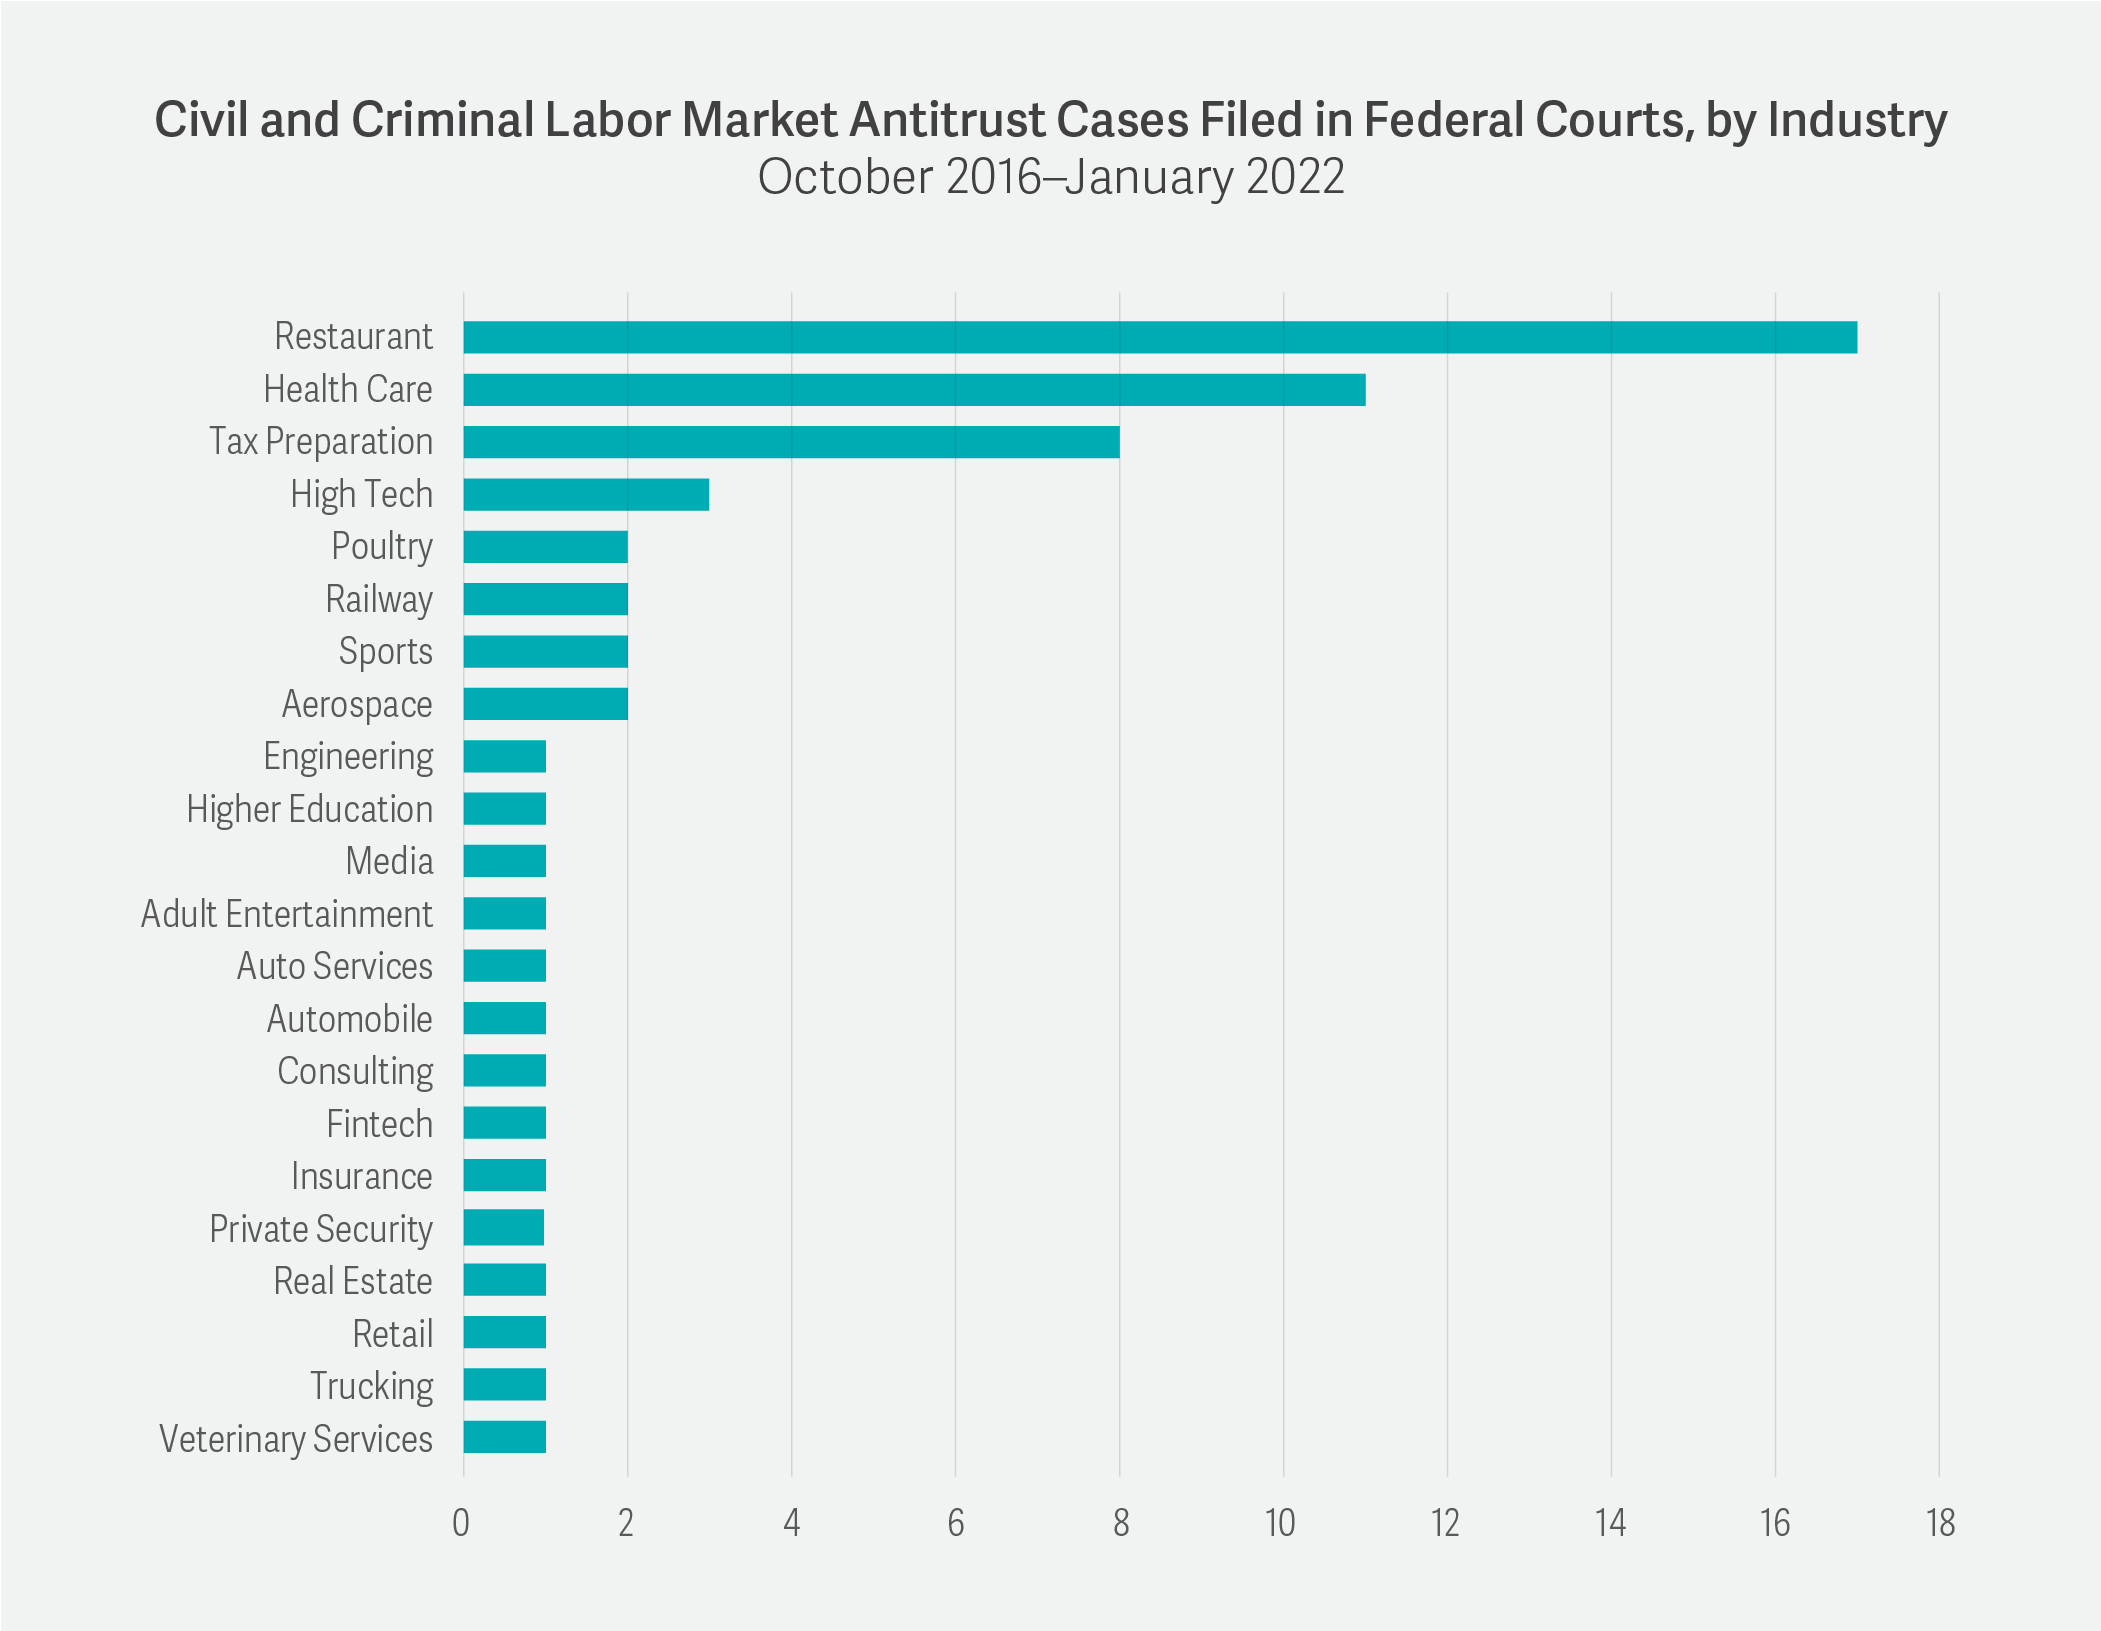 Civil and Criminal Labor Market Antitrust Cases Filed in Federal Courts, by Industry